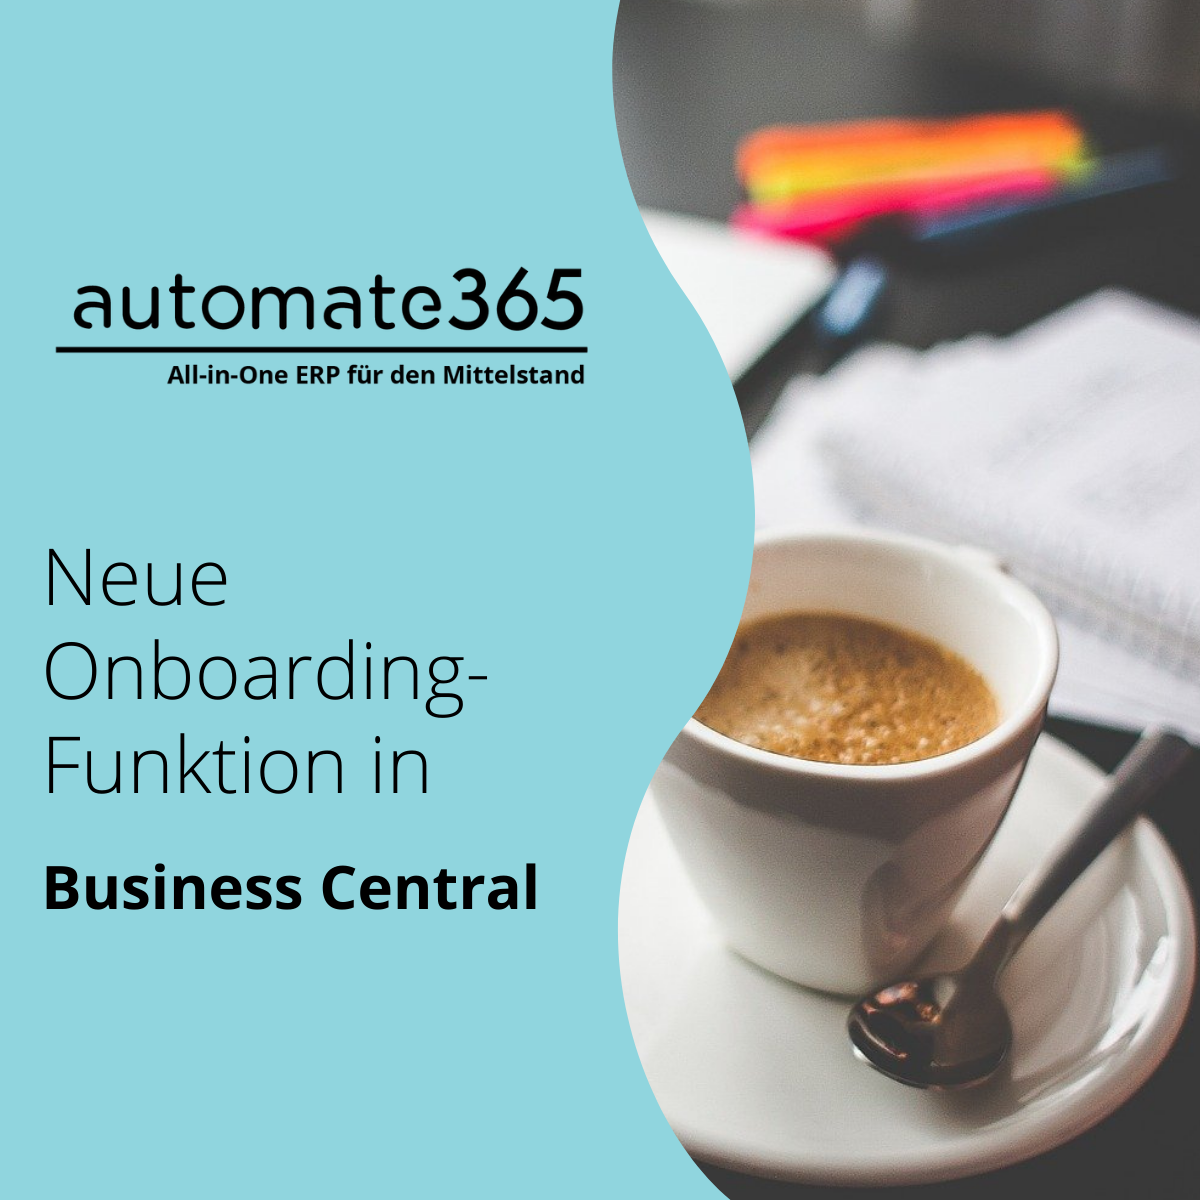 Neue Onboarding-Funktion in Business Central